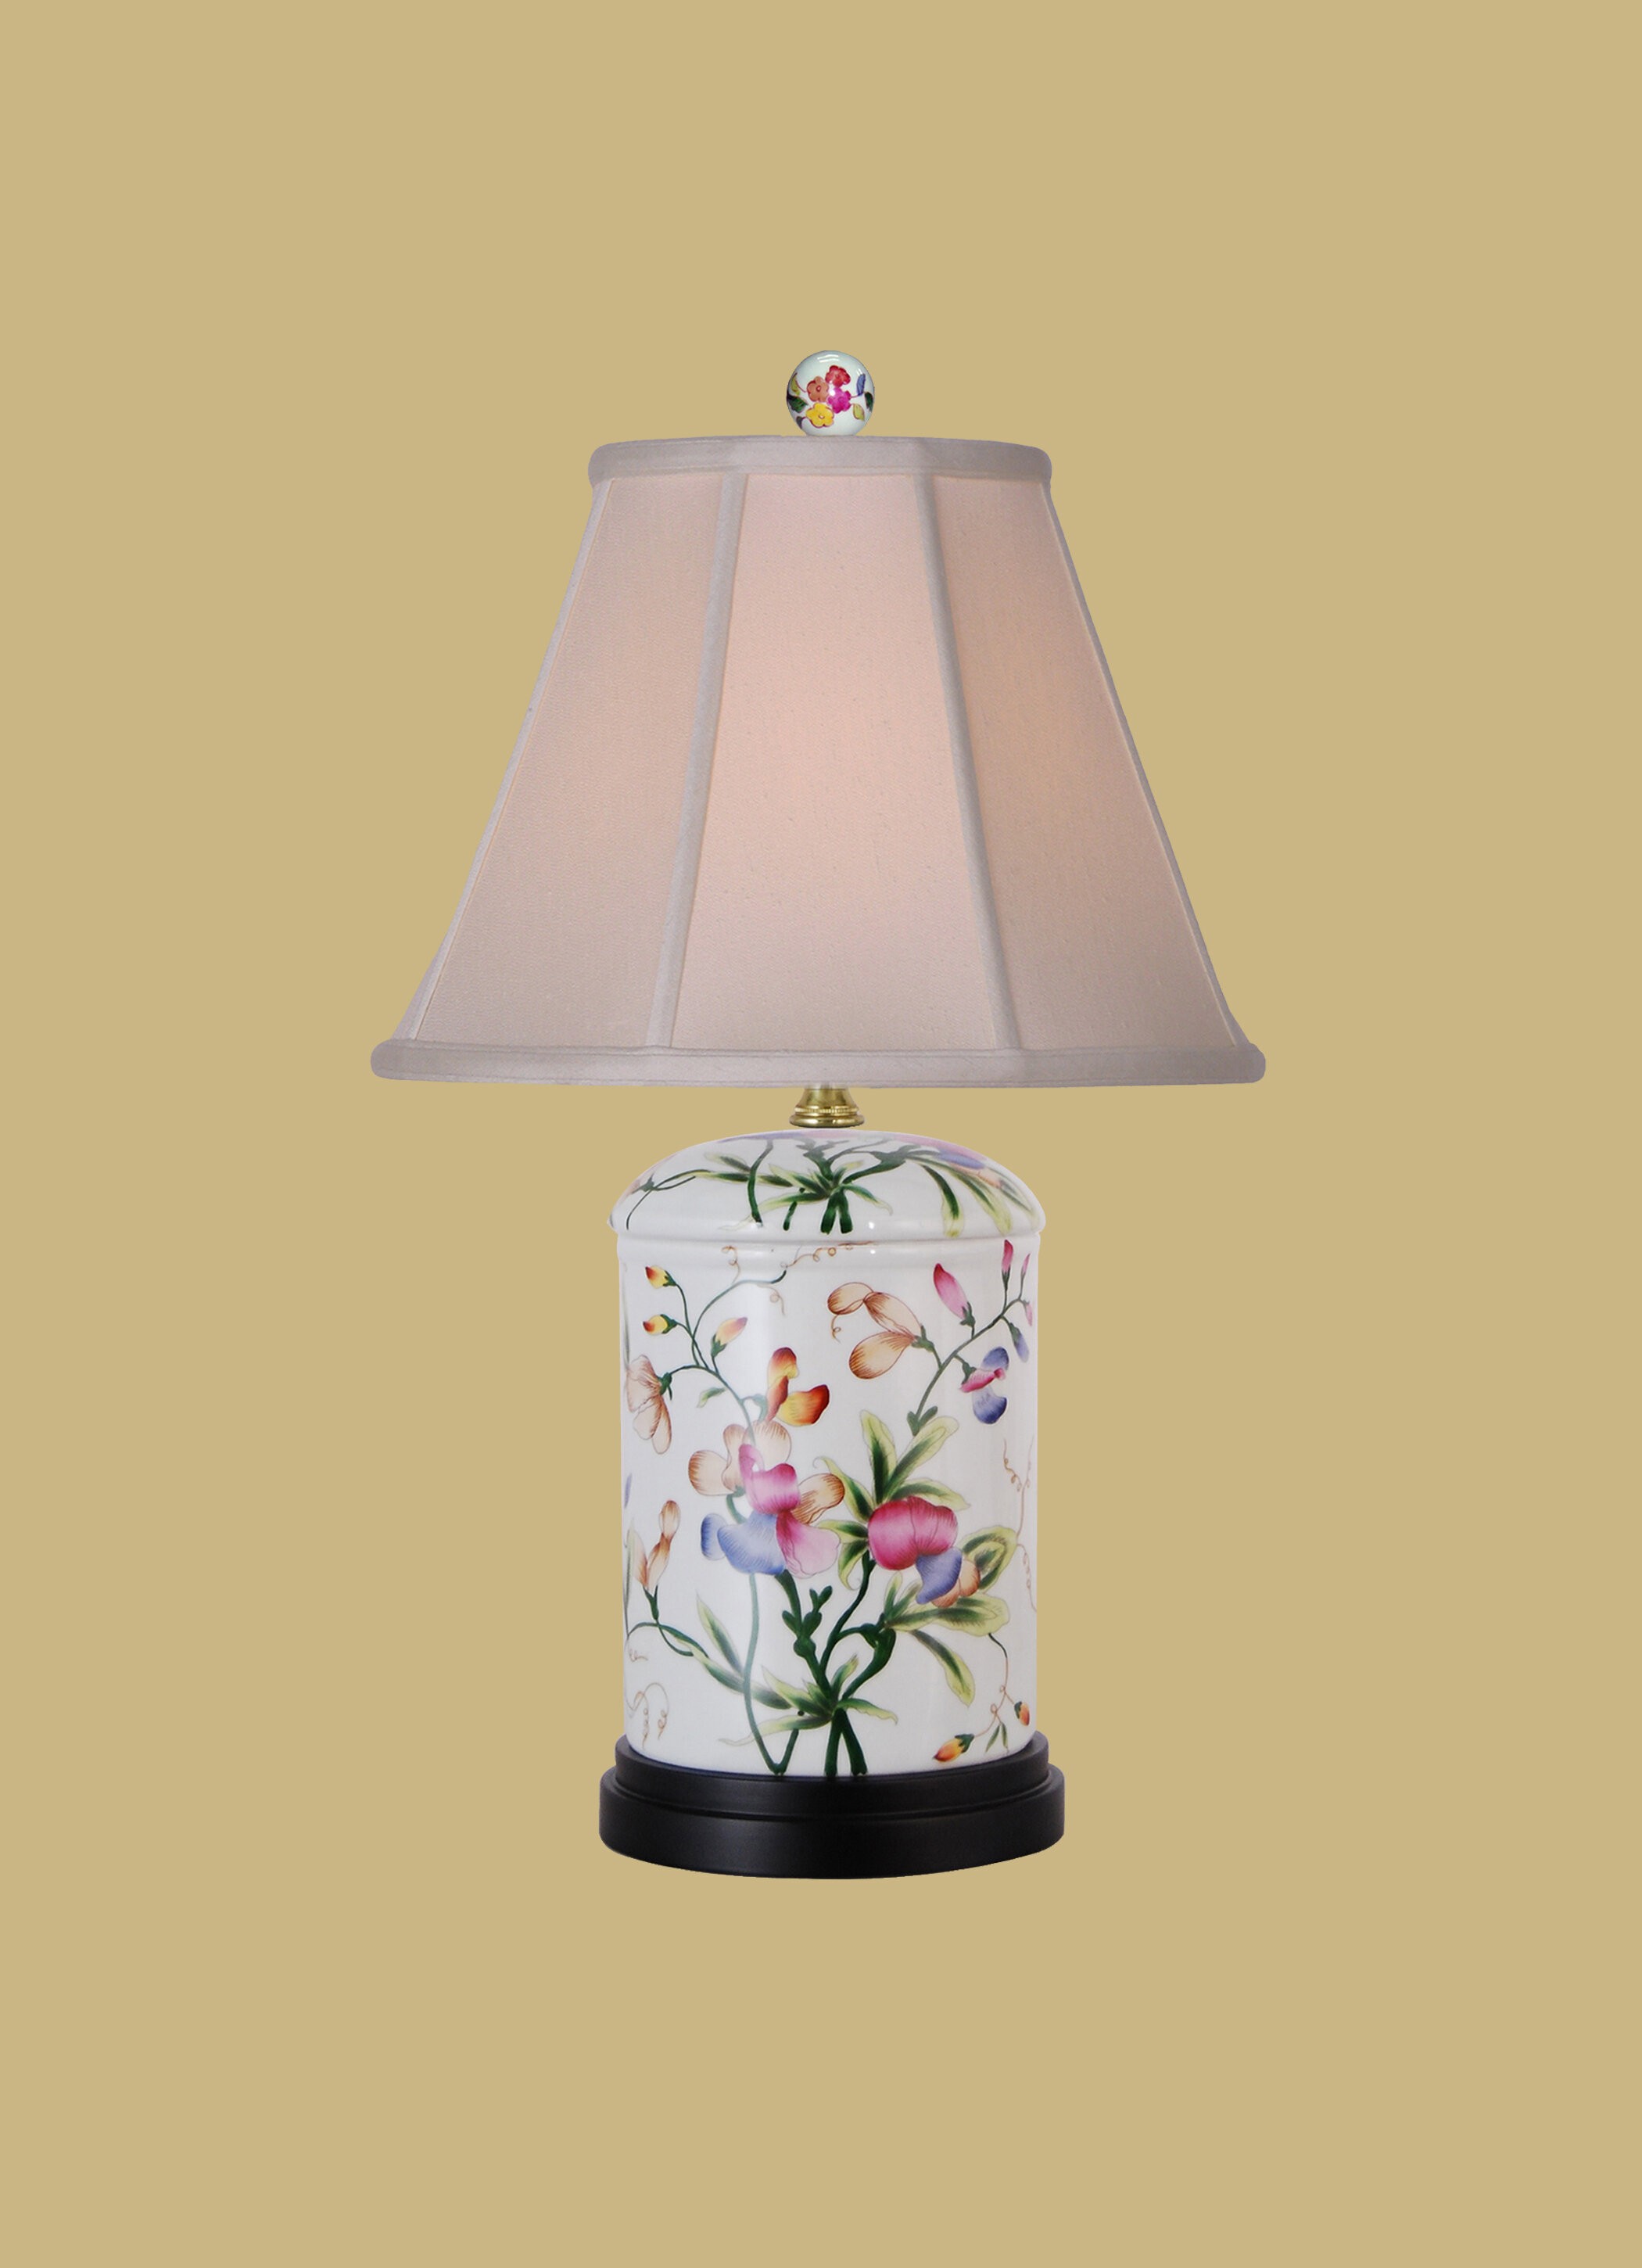 20" H Jar Table Lamp with Bell Shade